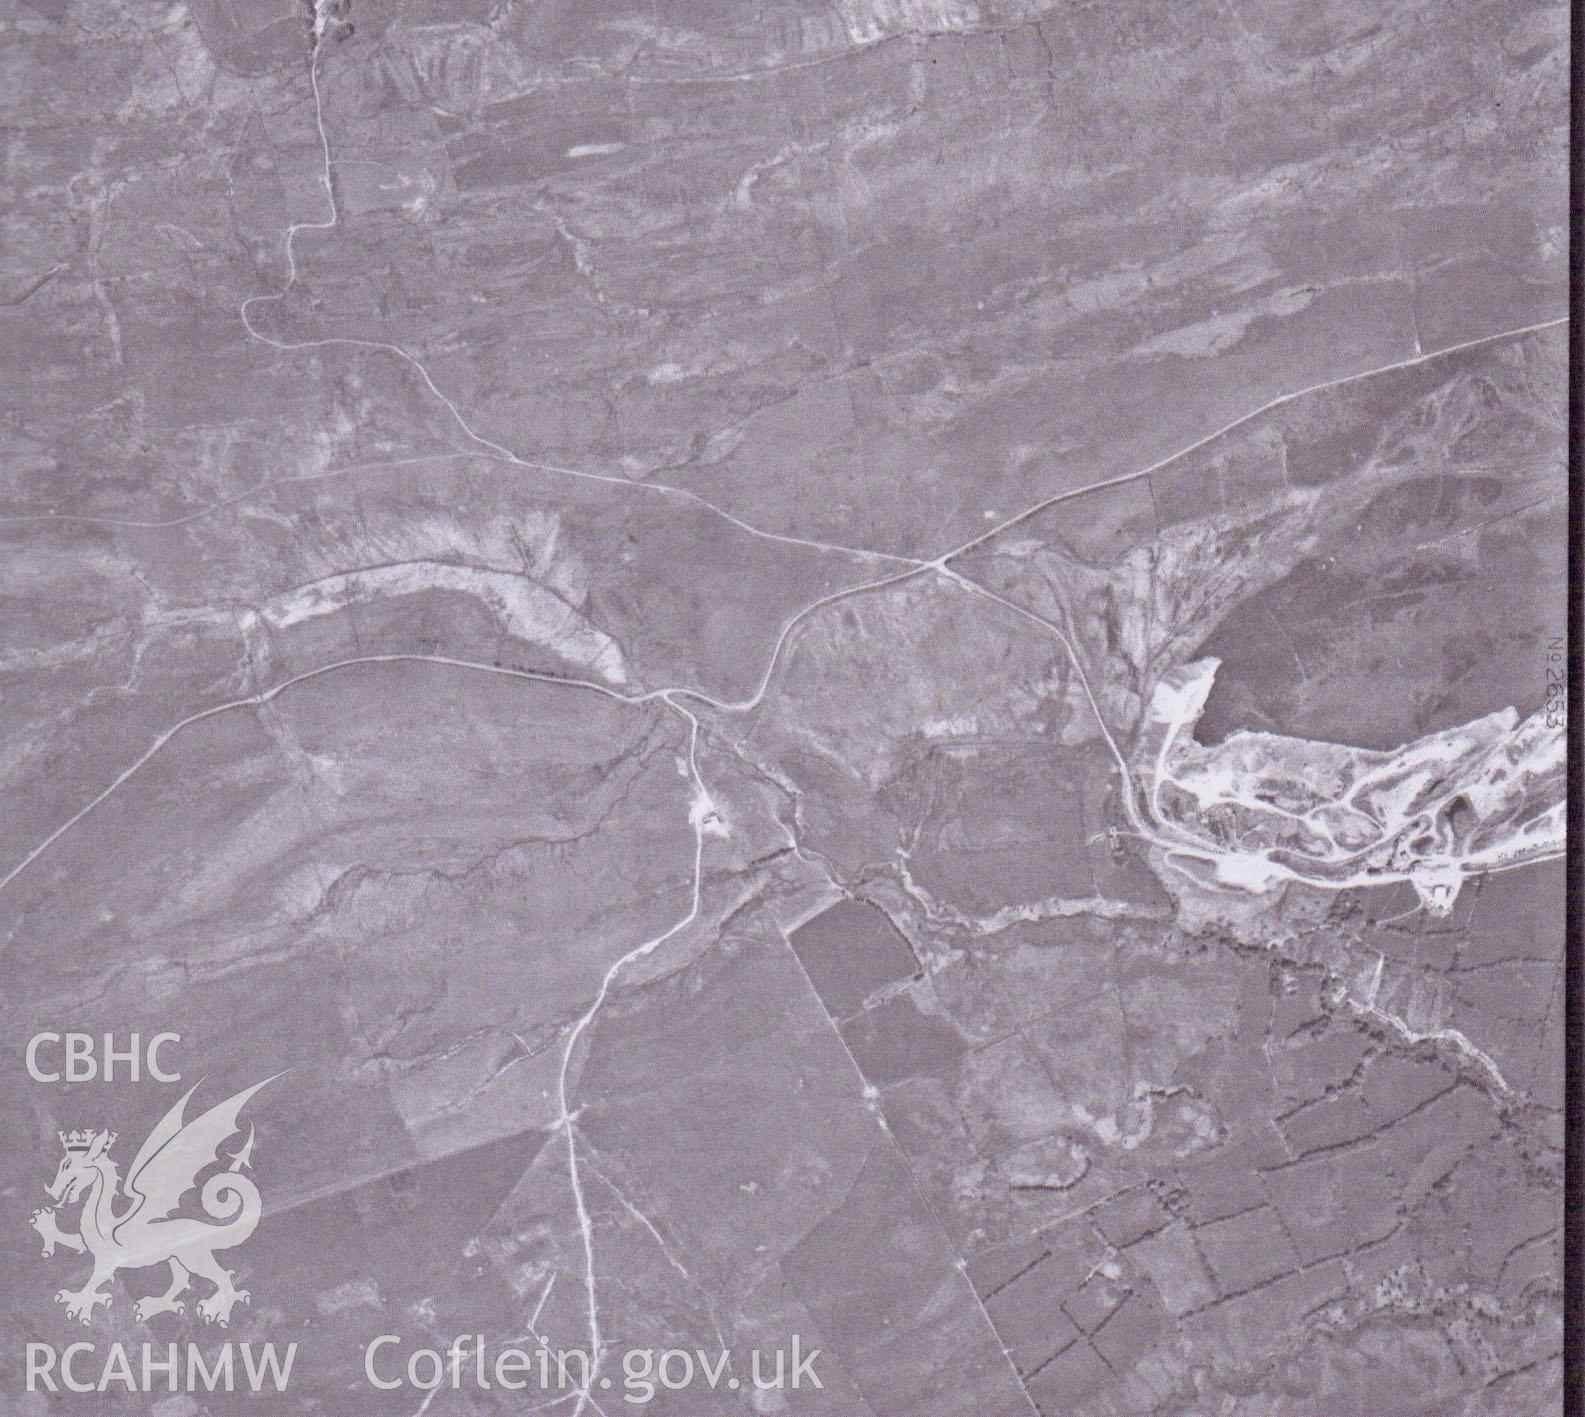 1978 OS aerial photograph showing assessment area for Tan y Foel Quarry, Cefn Coch, report no. 1089.